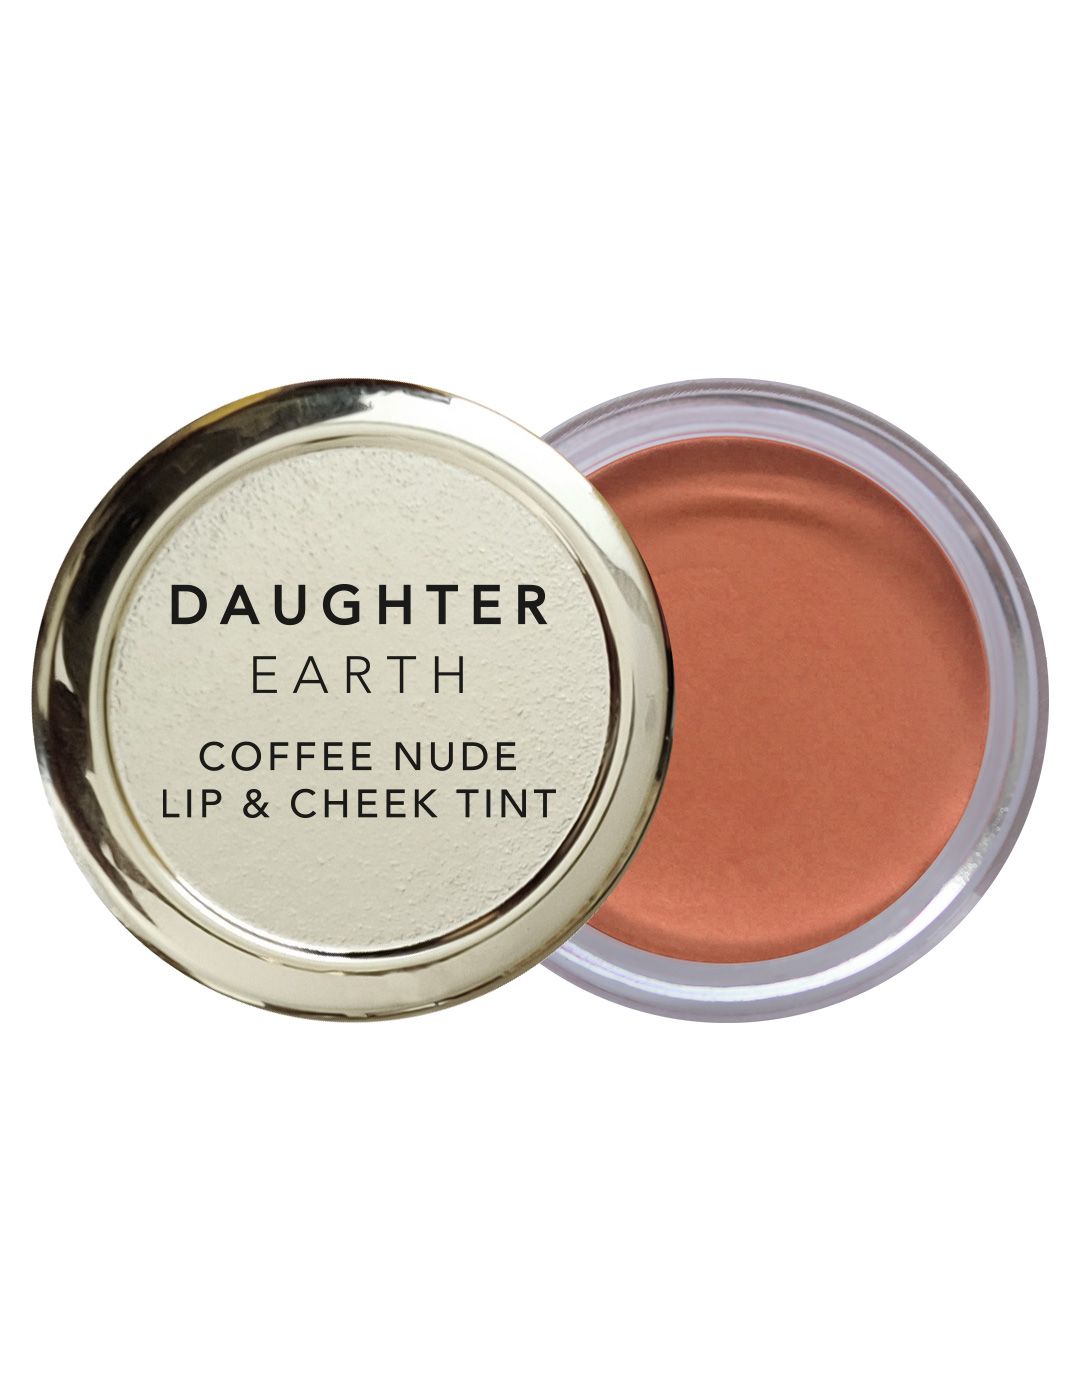 DAUGHTER EARTH Vegan & Safe Pigments Lip & Cheek Tint - Coffee Nude 4.5g Price in India